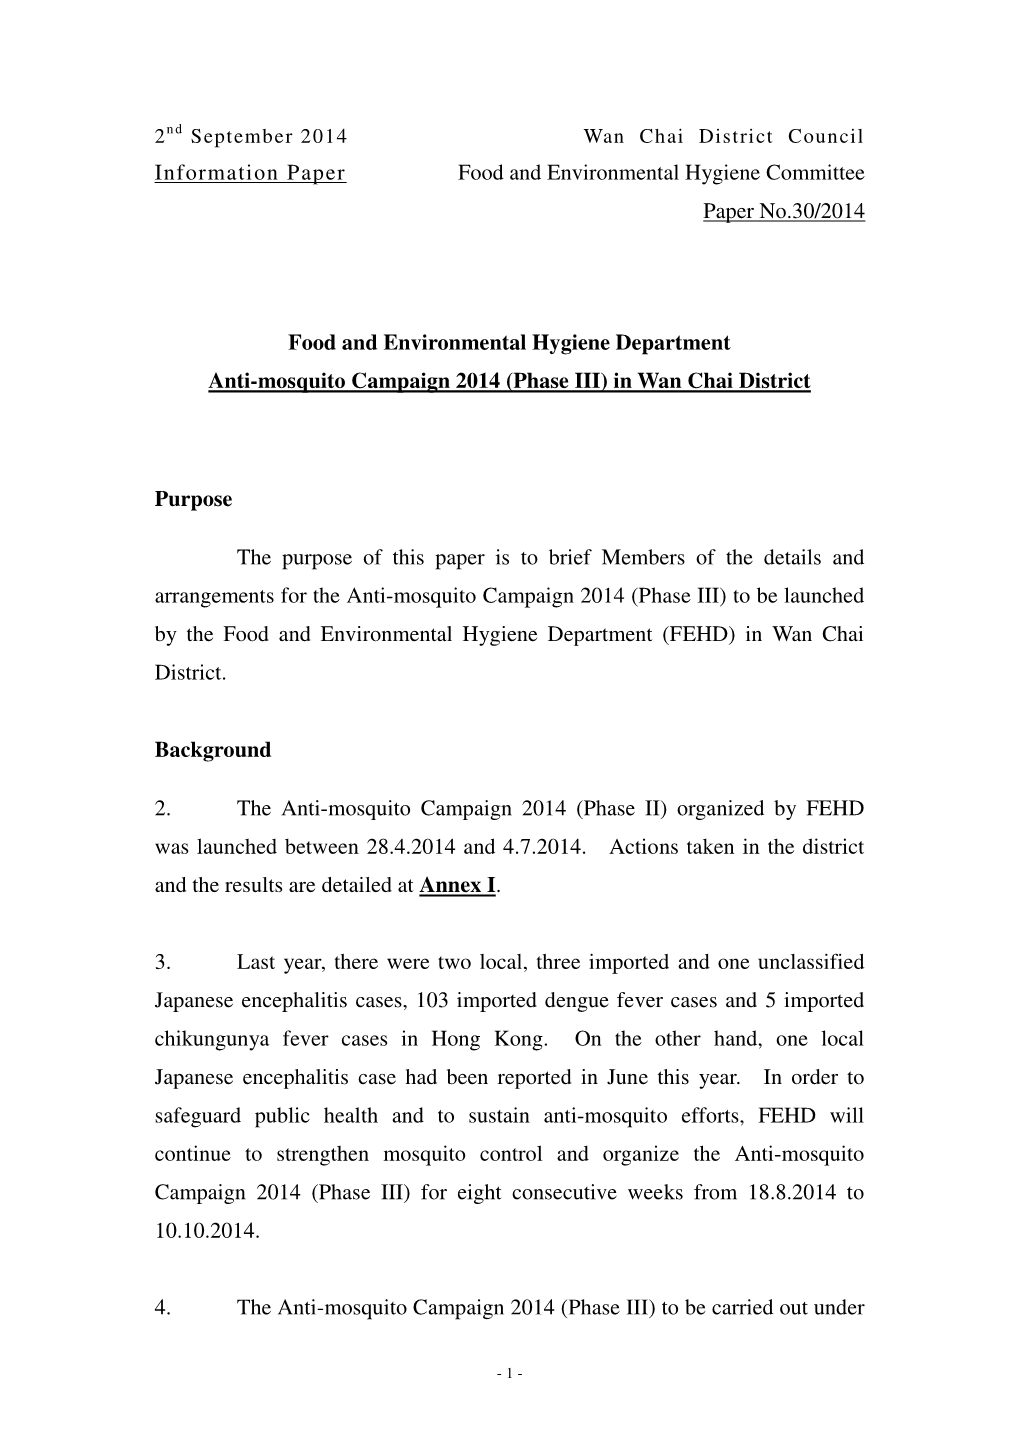 Information Paper Food and Environmental Hygiene Committee Paper No.30/2014